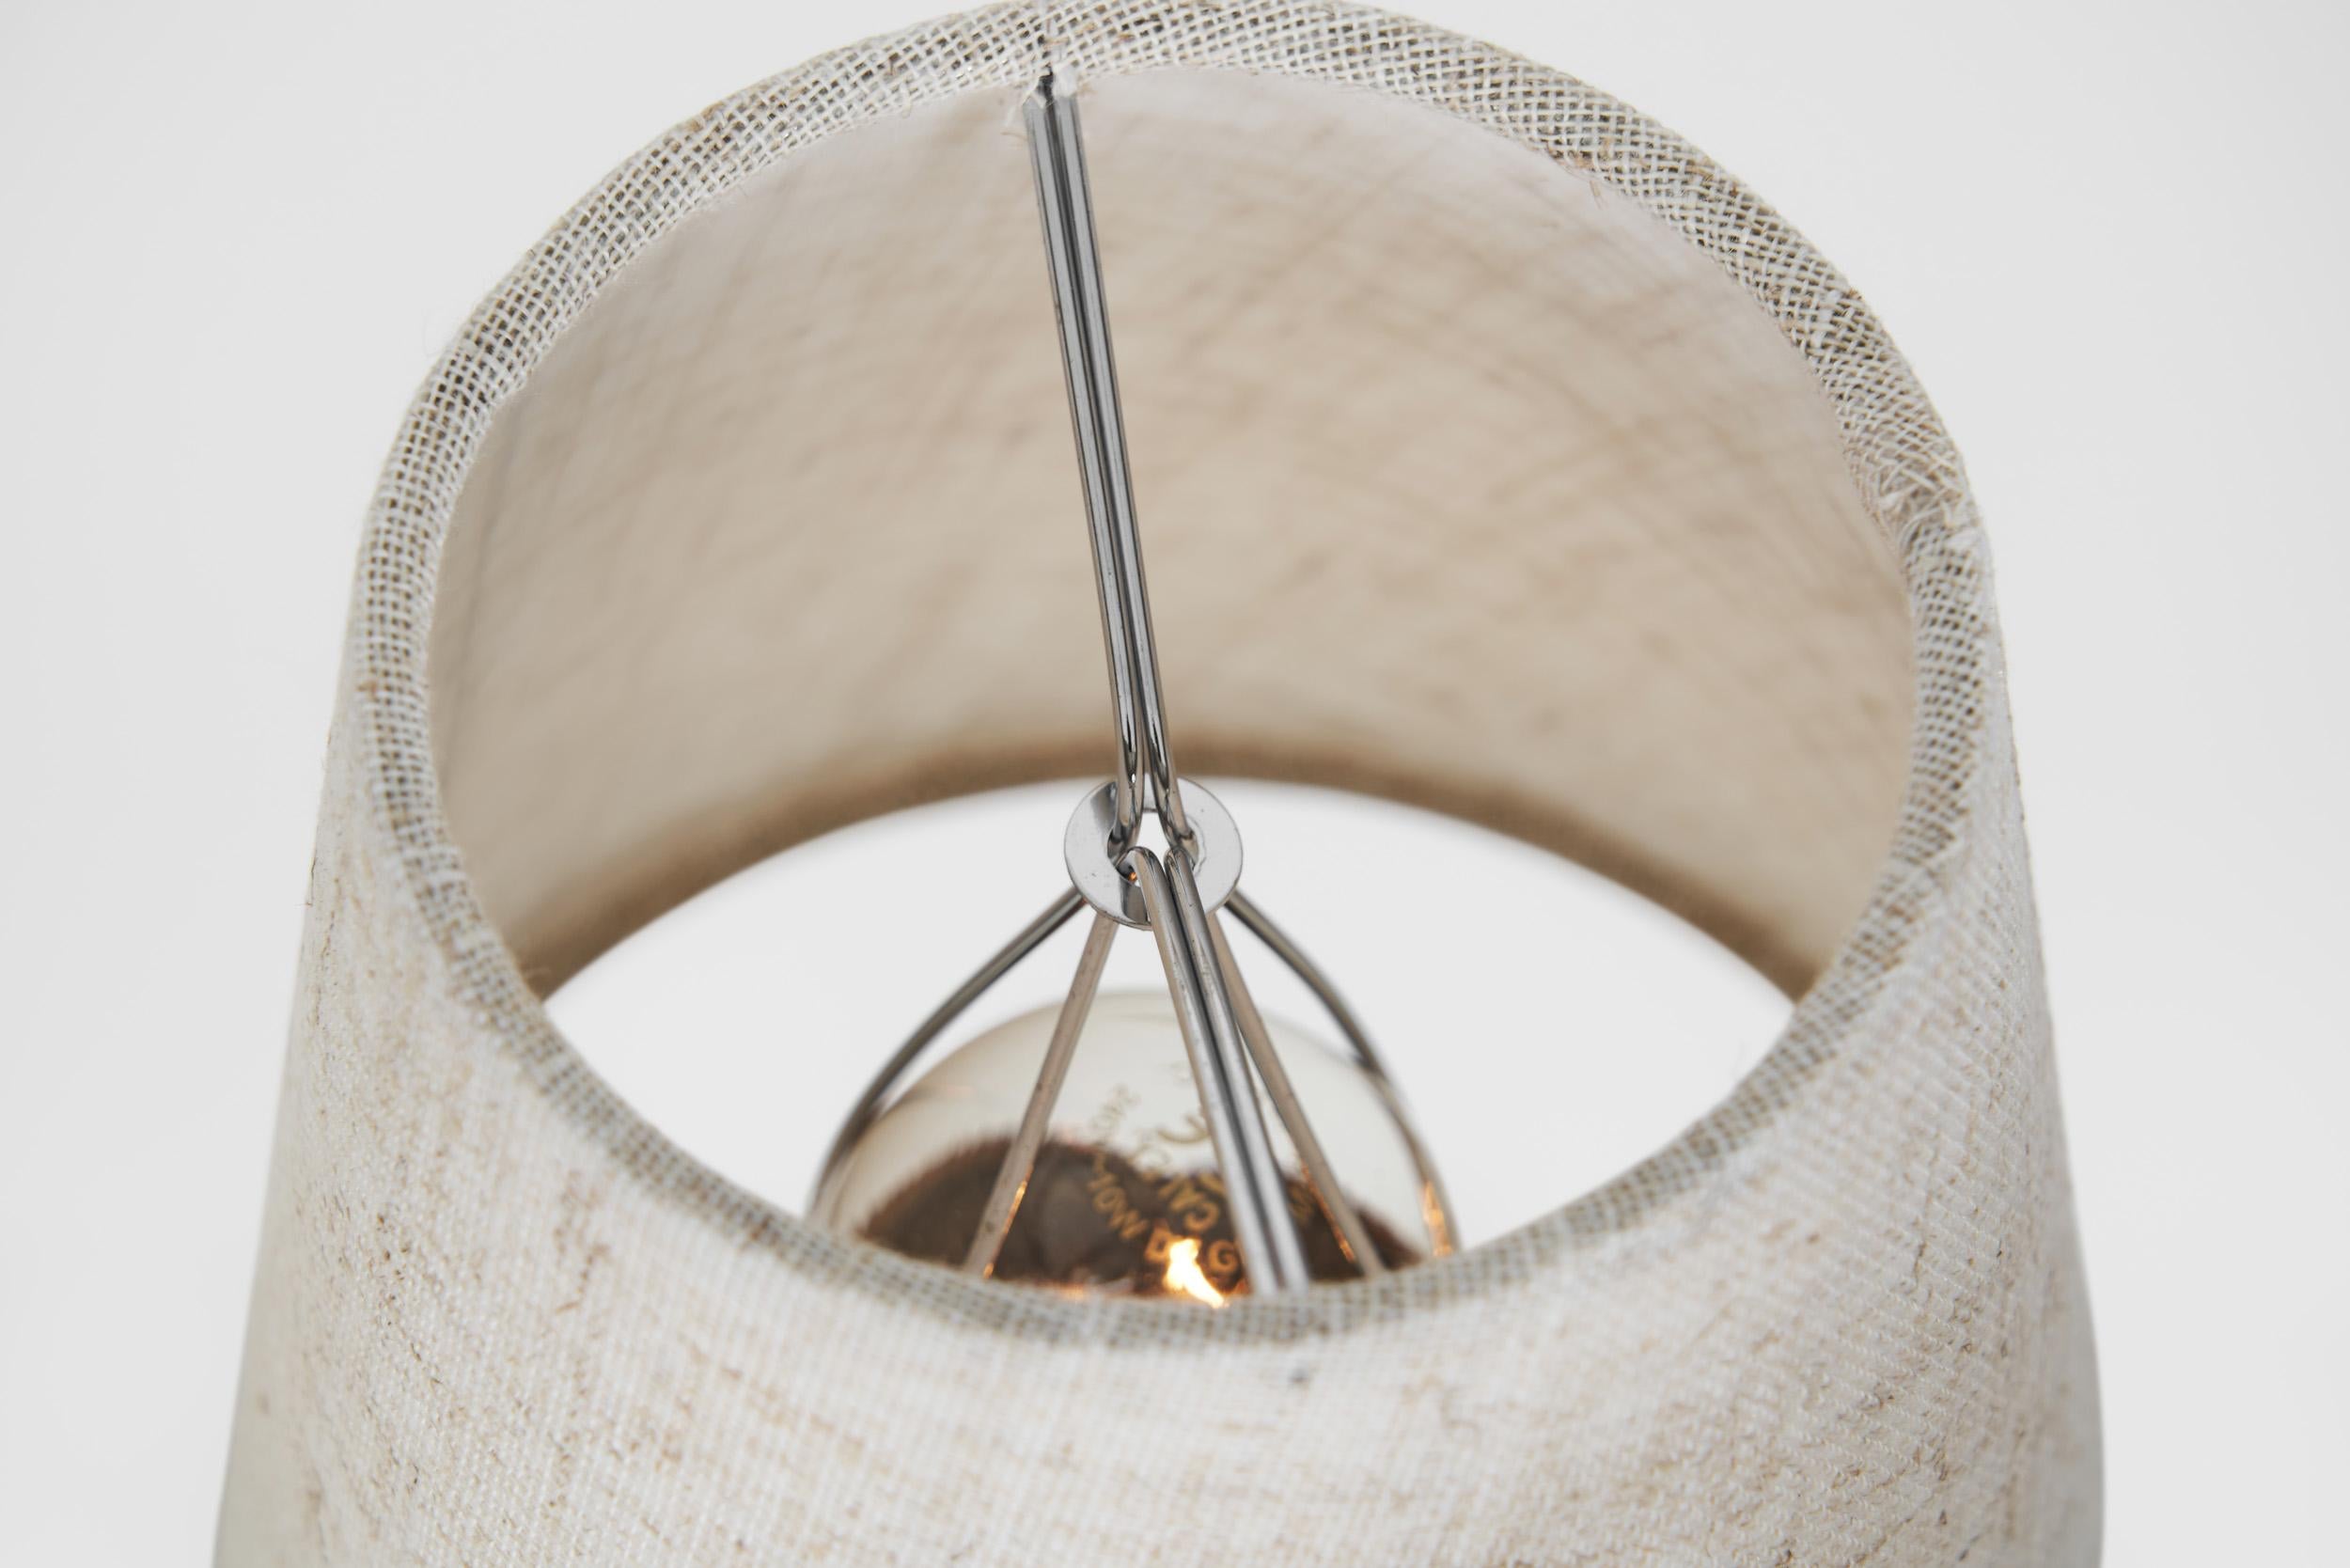 Swedish Modern Brass Ceiling Light with Fabric Shades, Sweden Mid-20th Century For Sale 14